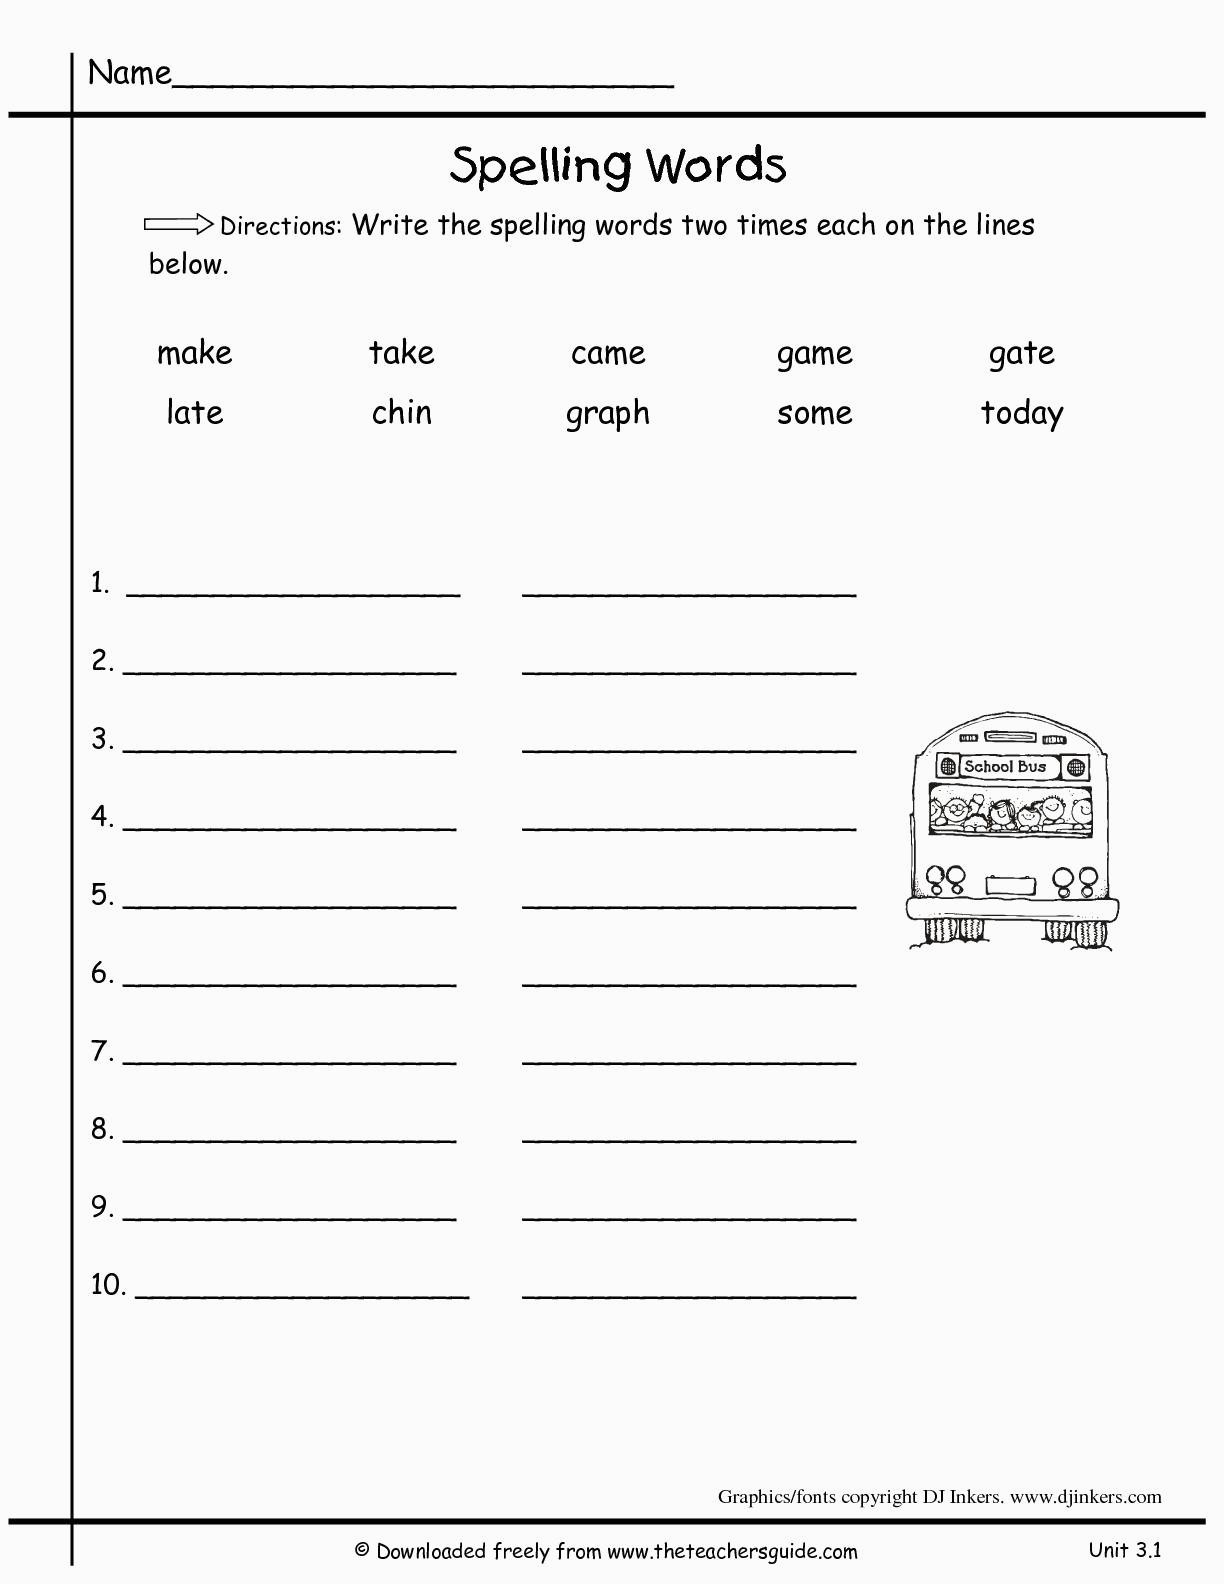 Spelling Worksheets 2nd Graders Awesome 2nd Grade Spelling Worksheets for Educations 2nd Grade